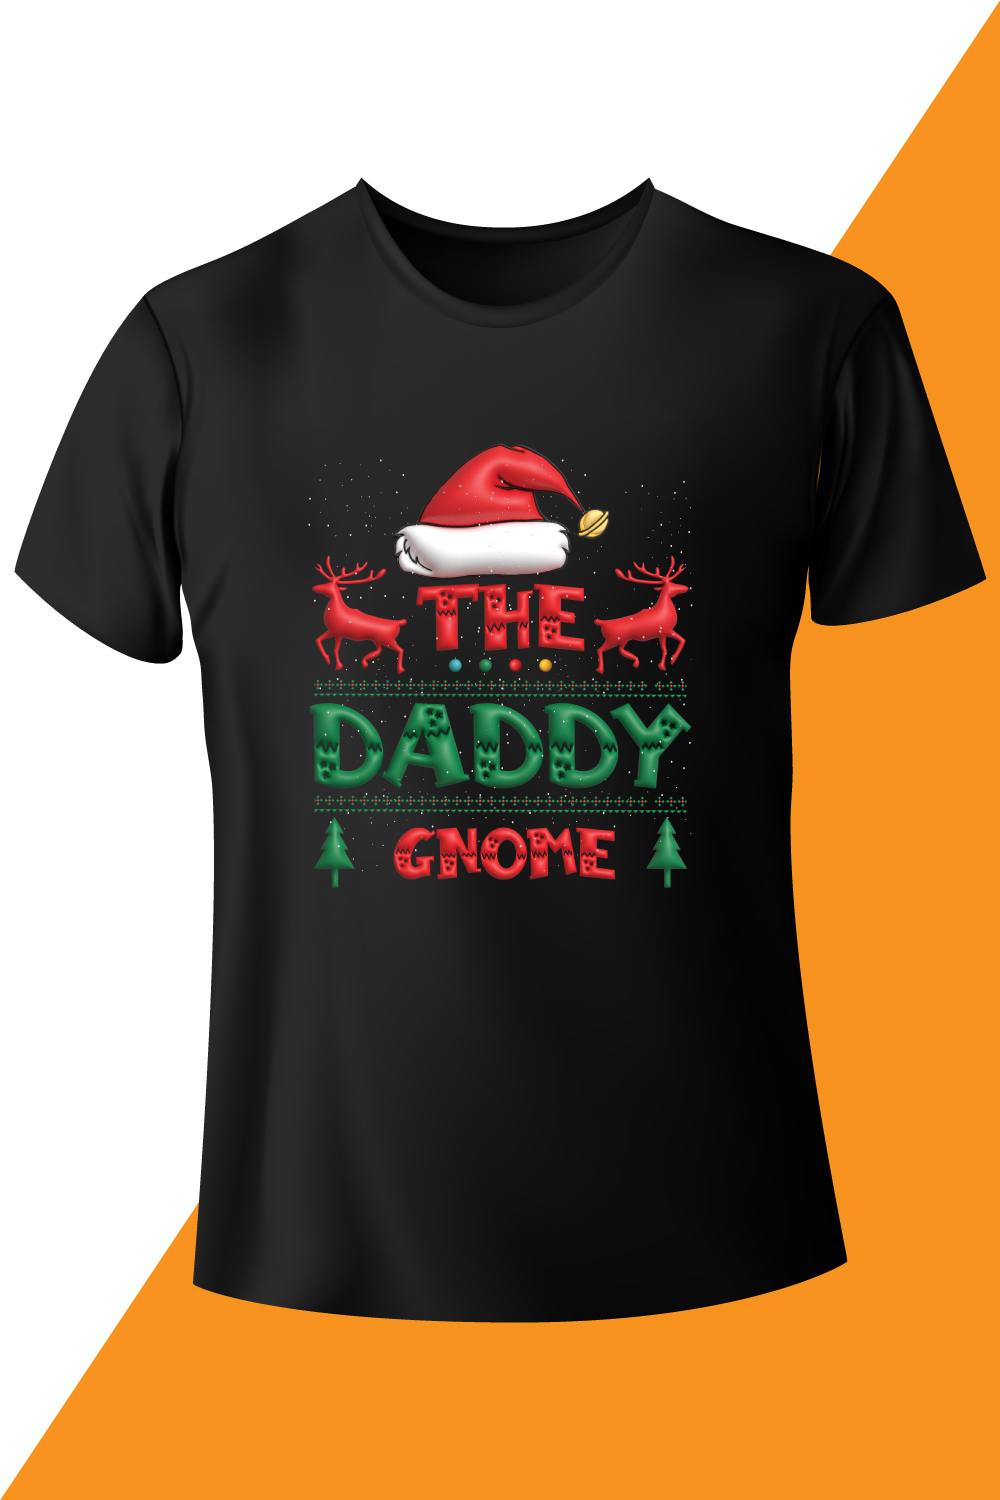 Picture of a black t-shirt with exquisite The daddy gnome slogan.